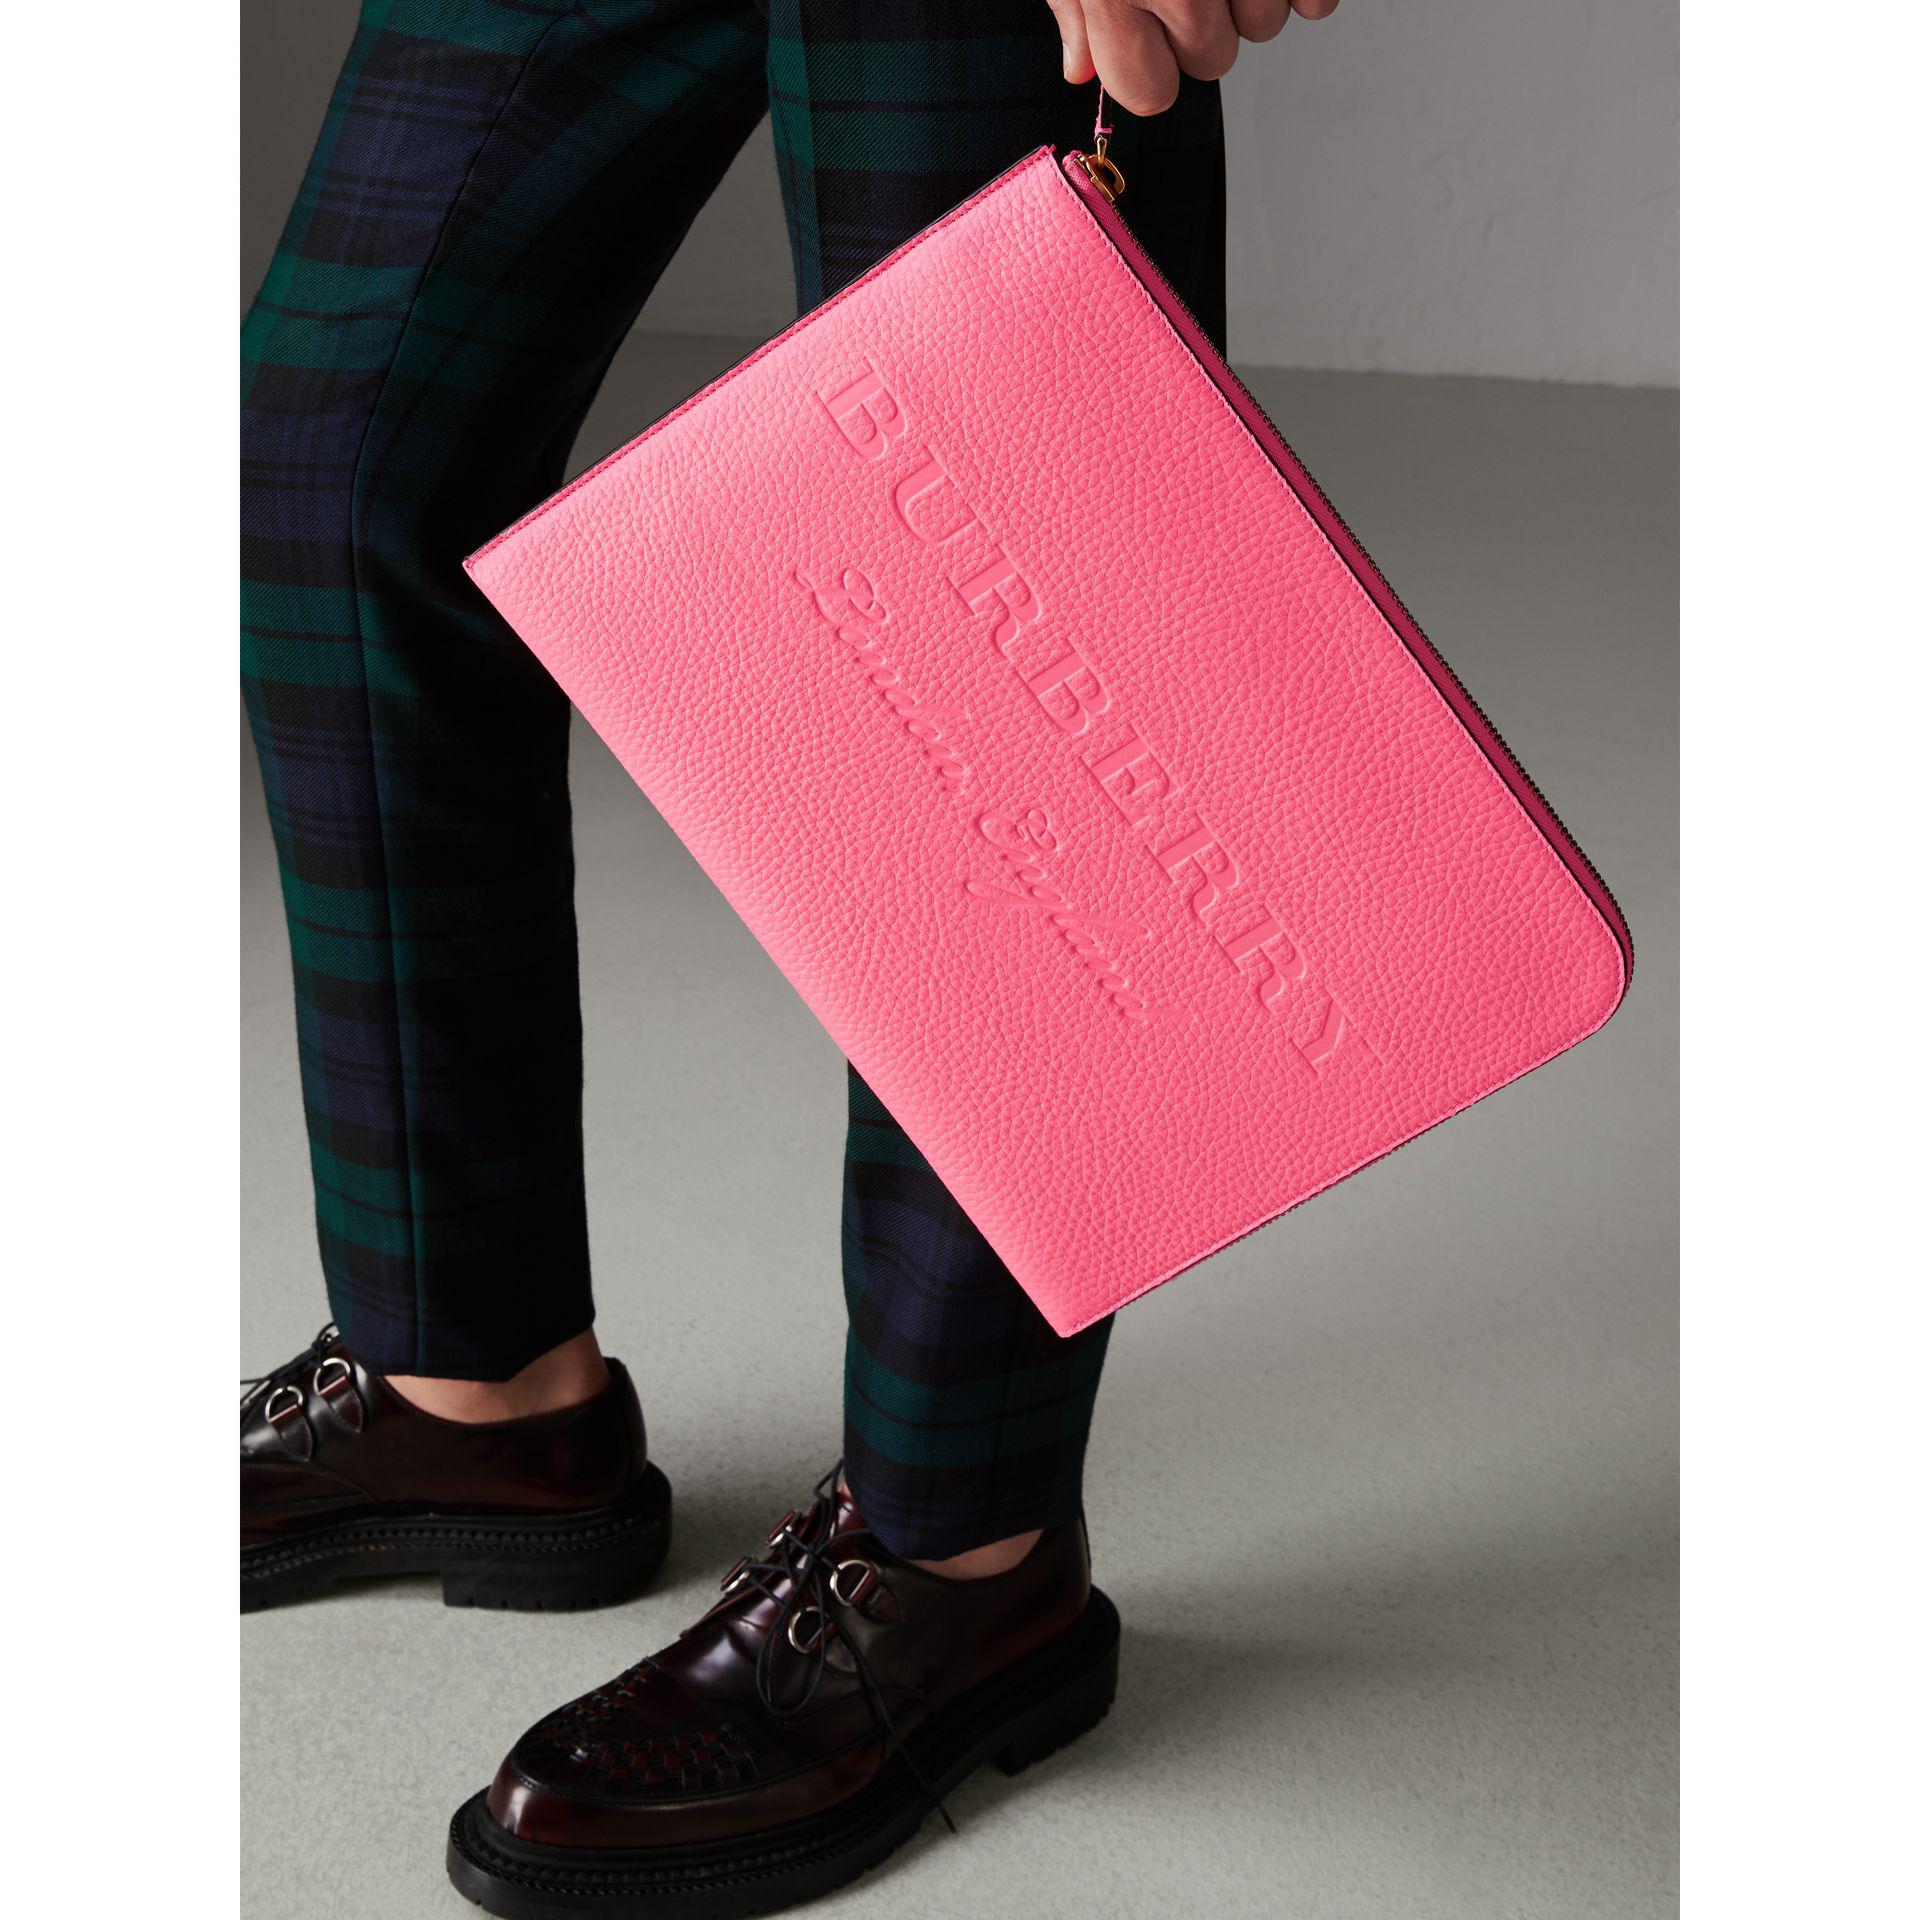 Burberry Embossed Leather Document Case in Neon Pink (Pink) for Men - Lyst